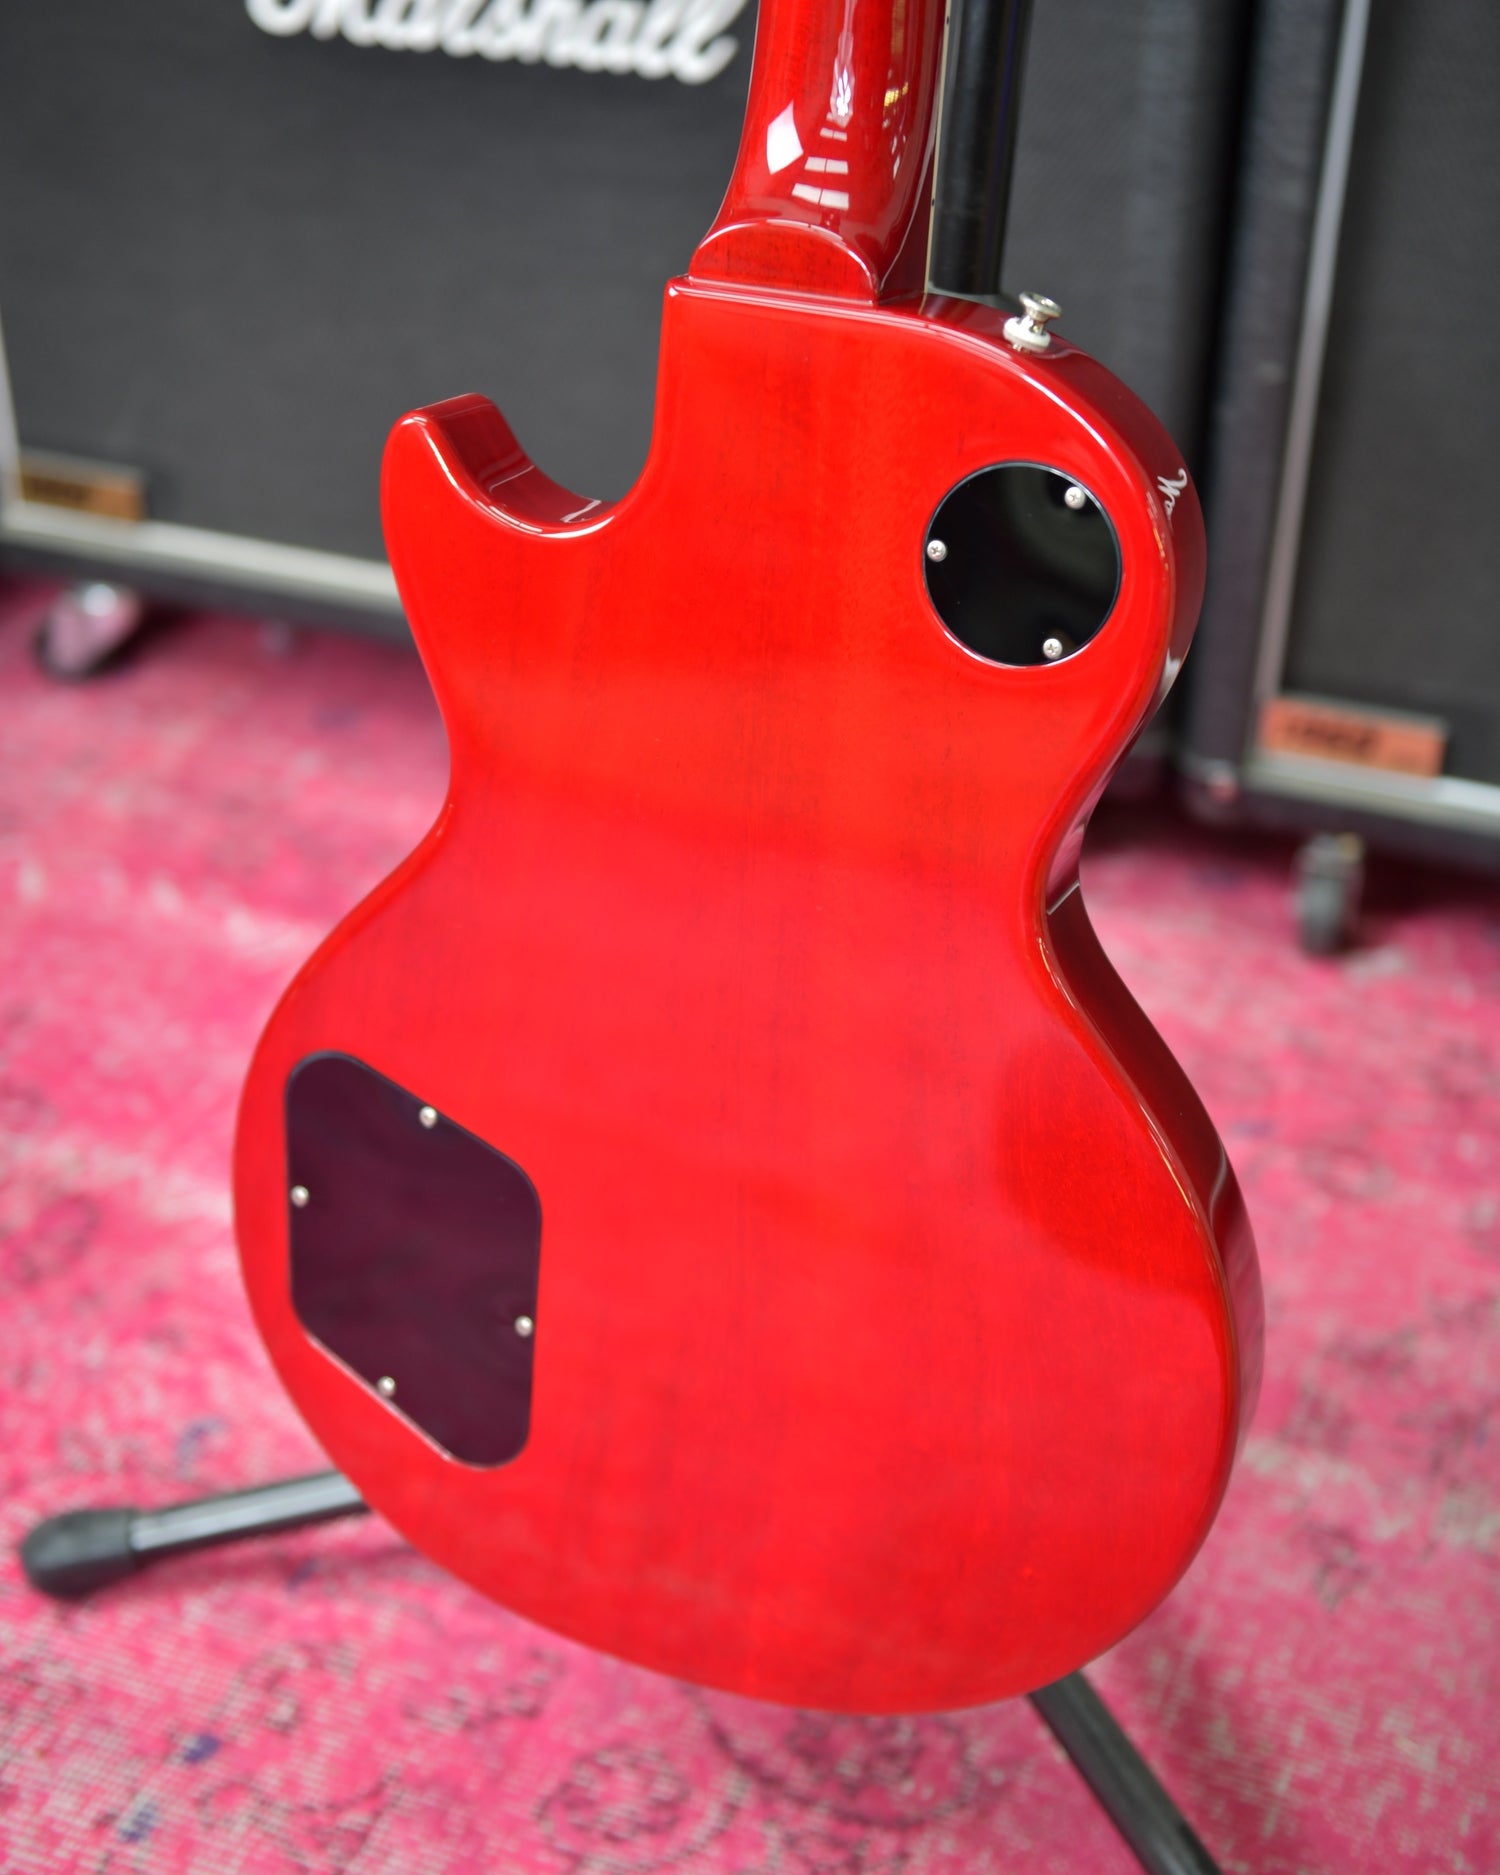 Tokai Love Rock Les Paul Special Cherry Red Made In Japan 2015